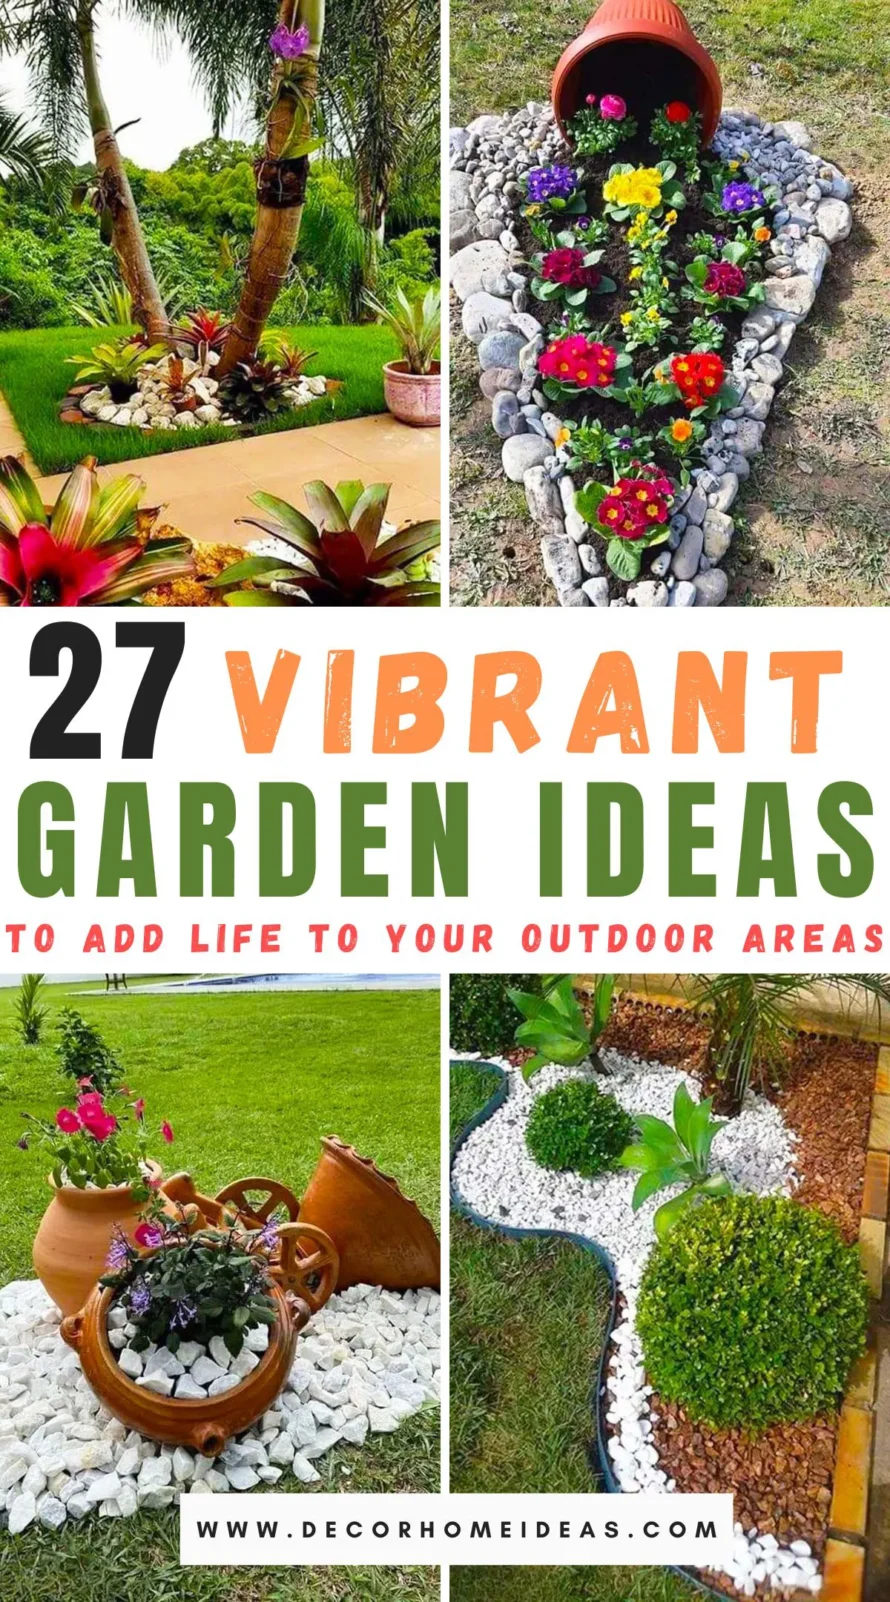 Explore 27 vibrant garden designs that promise to breathe new life into your outdoor spaces. Whether you're looking to create a cozy nook or a sprawling floral paradise, these ideas will inspire you to transform any area into a lively and inviting retreat. Dive in and start planning your garden makeover today!